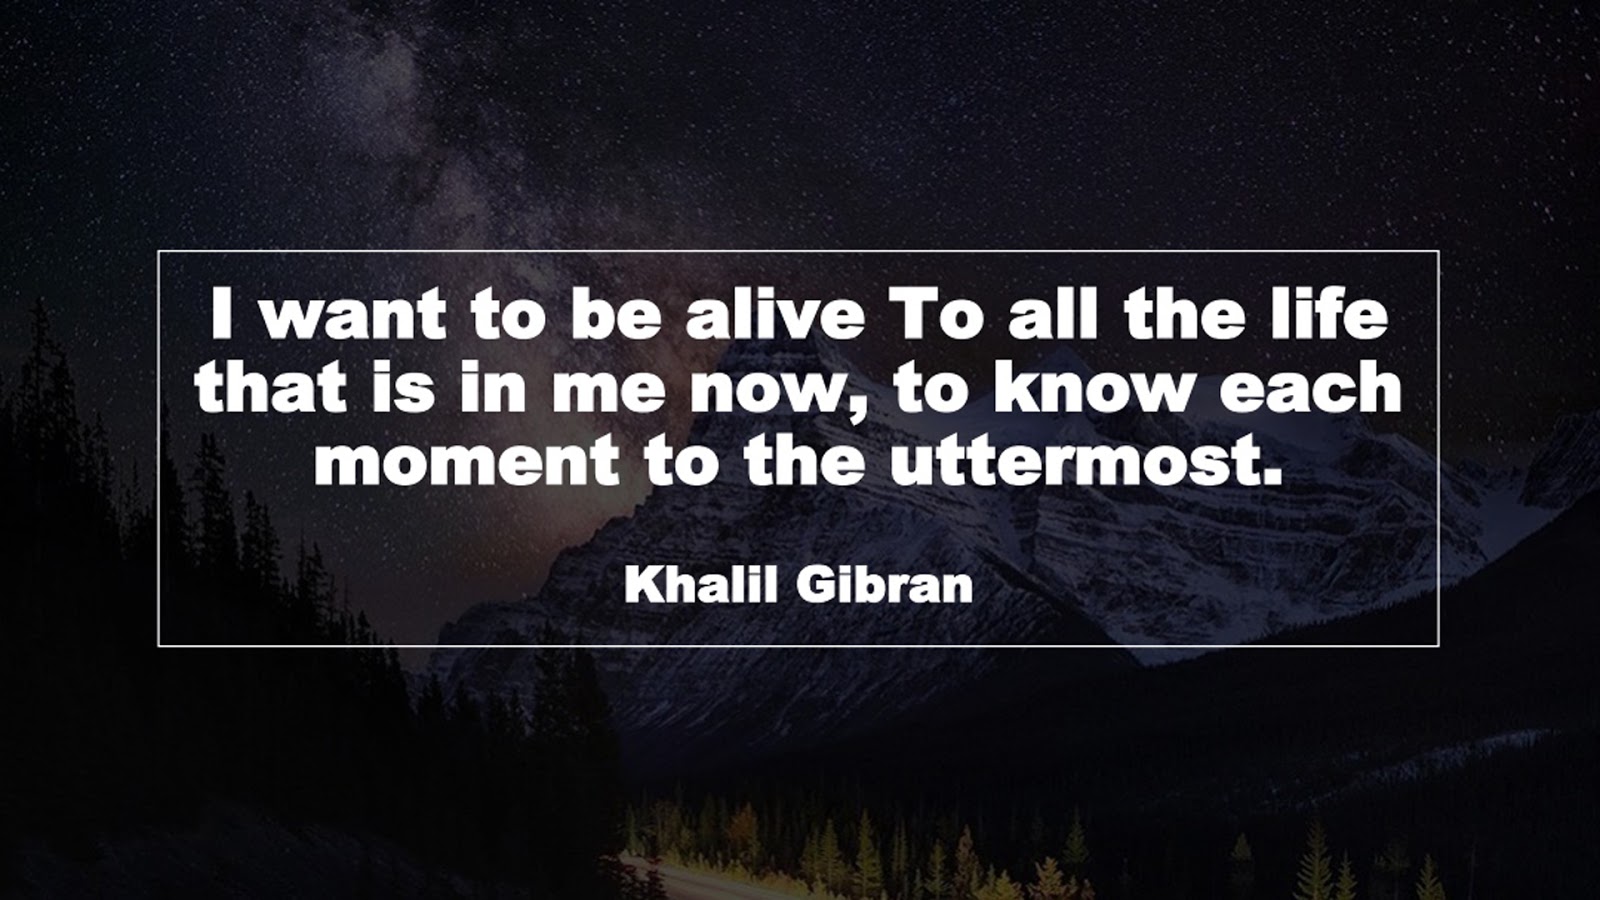 I want to be alive To all the life that is in me now, to know each moment to the uttermost. (Khalil Gibran)